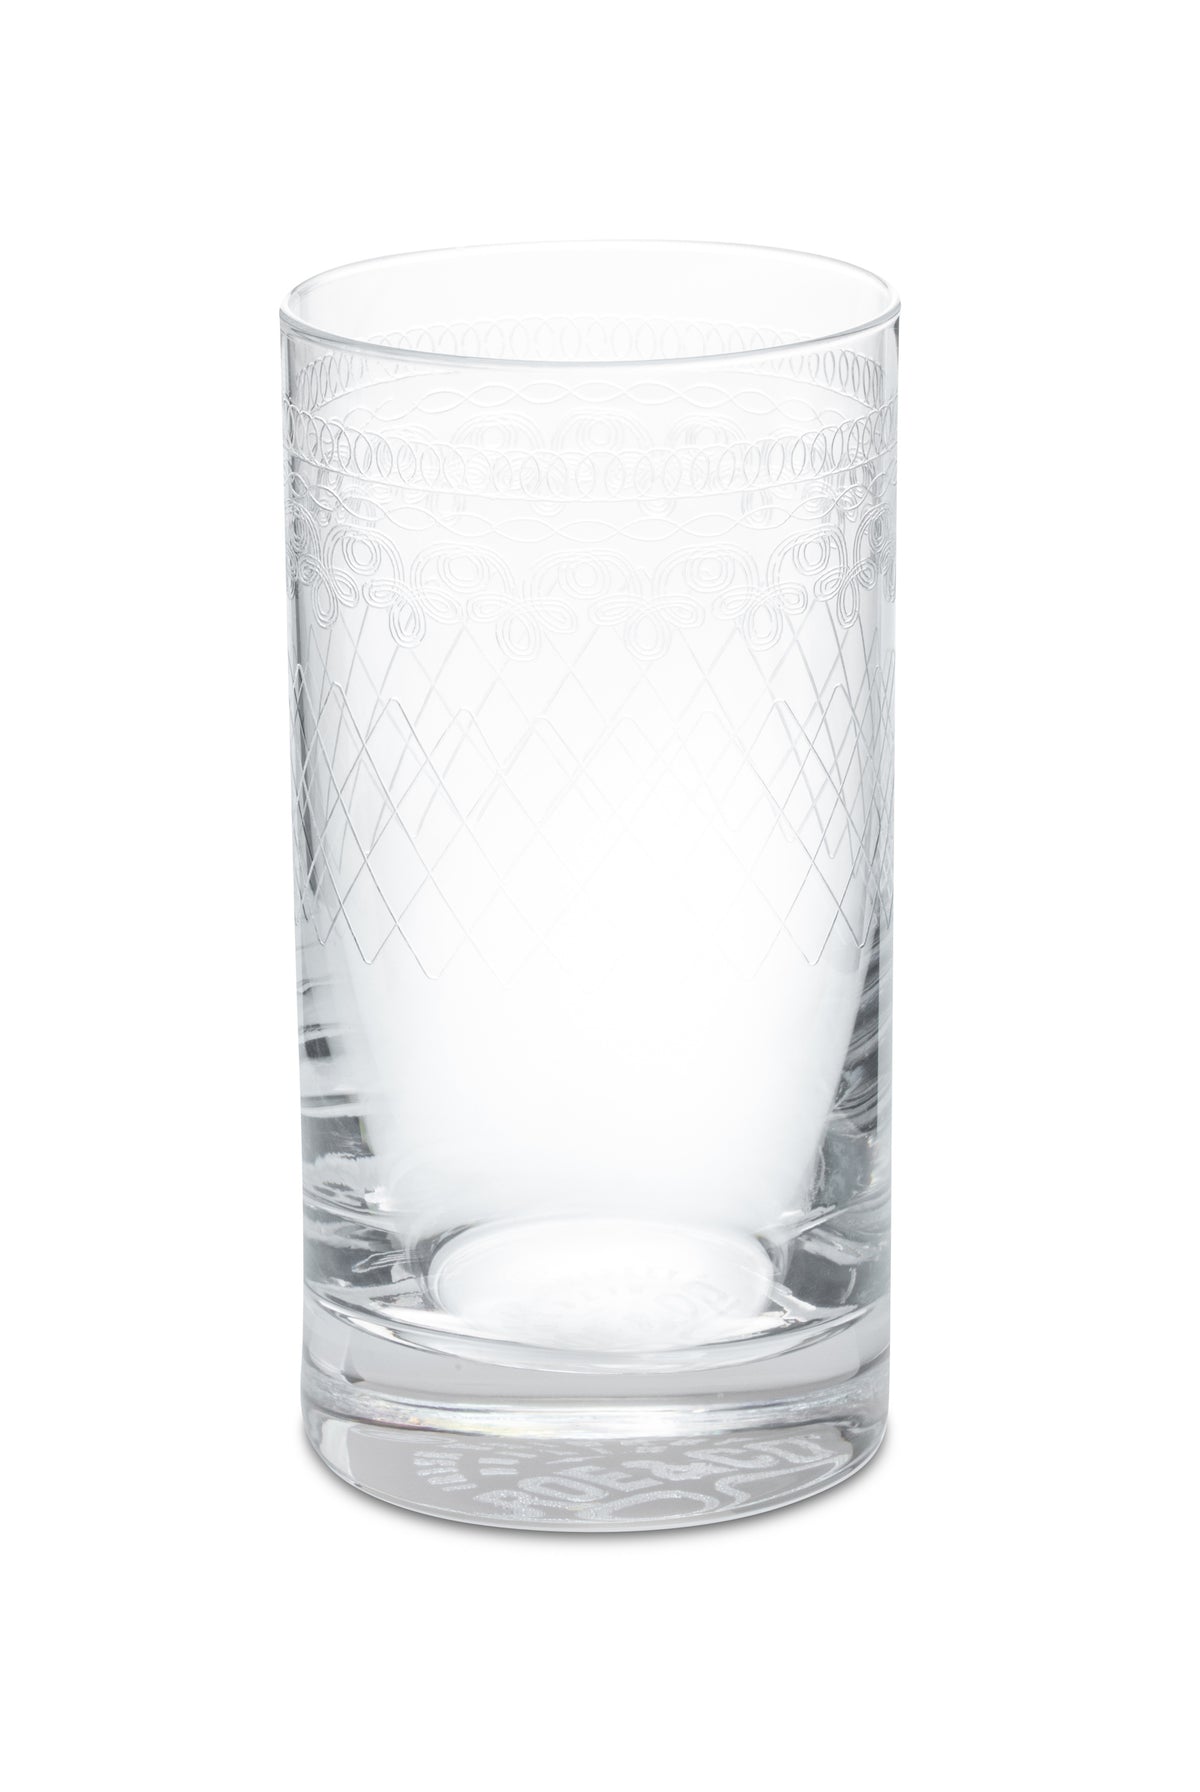 Roe & Co Whiskey Water Glass